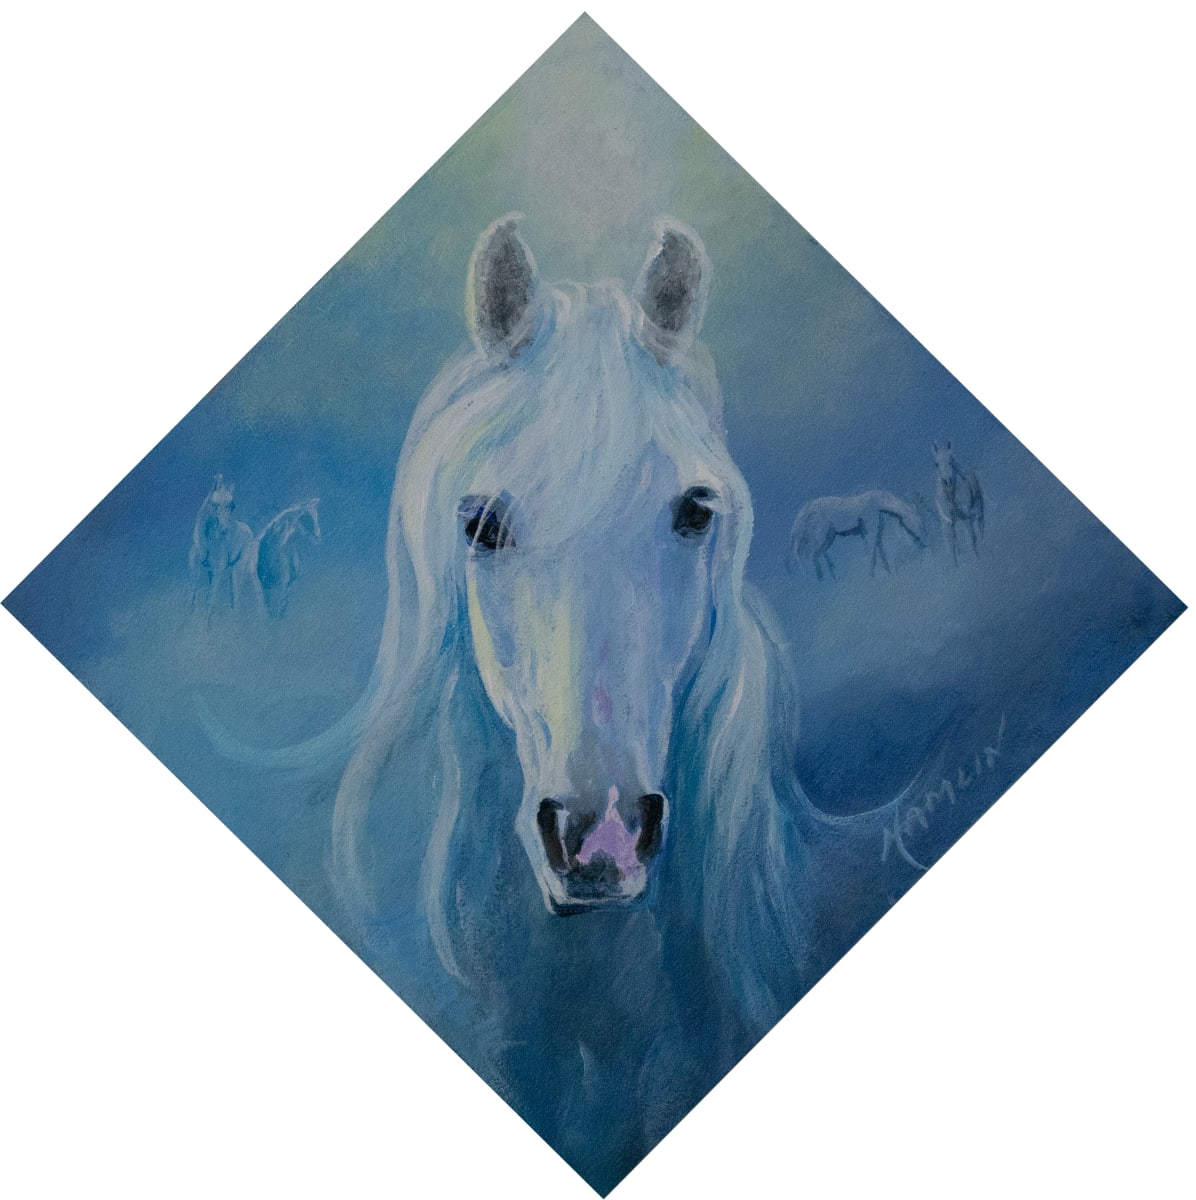 Little Gem Friends in the Mist by Bonnie Hamlin  Image: Gentle eyes and a flowing mane